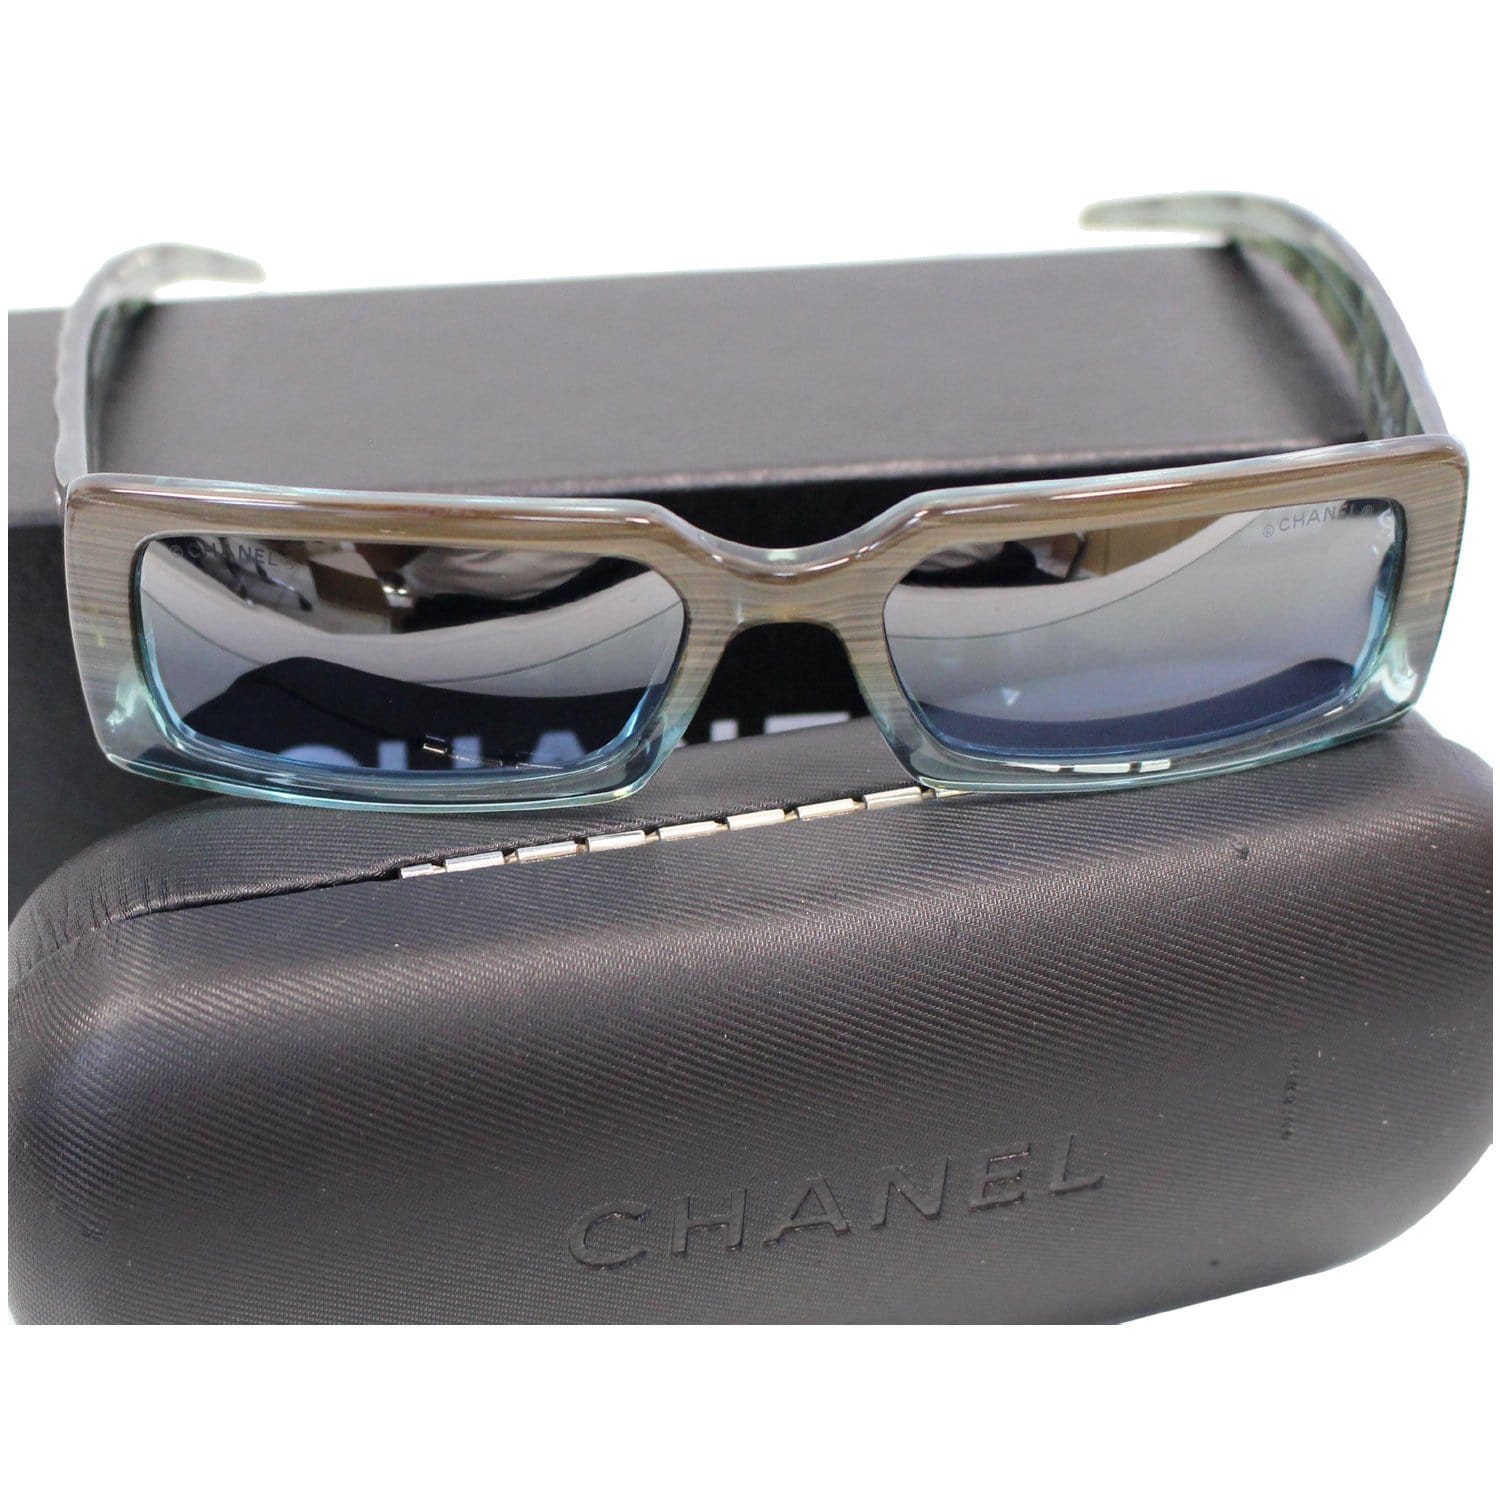 Chanel Sunglasses with Box & Case for Sale in Seattle, WA - OfferUp